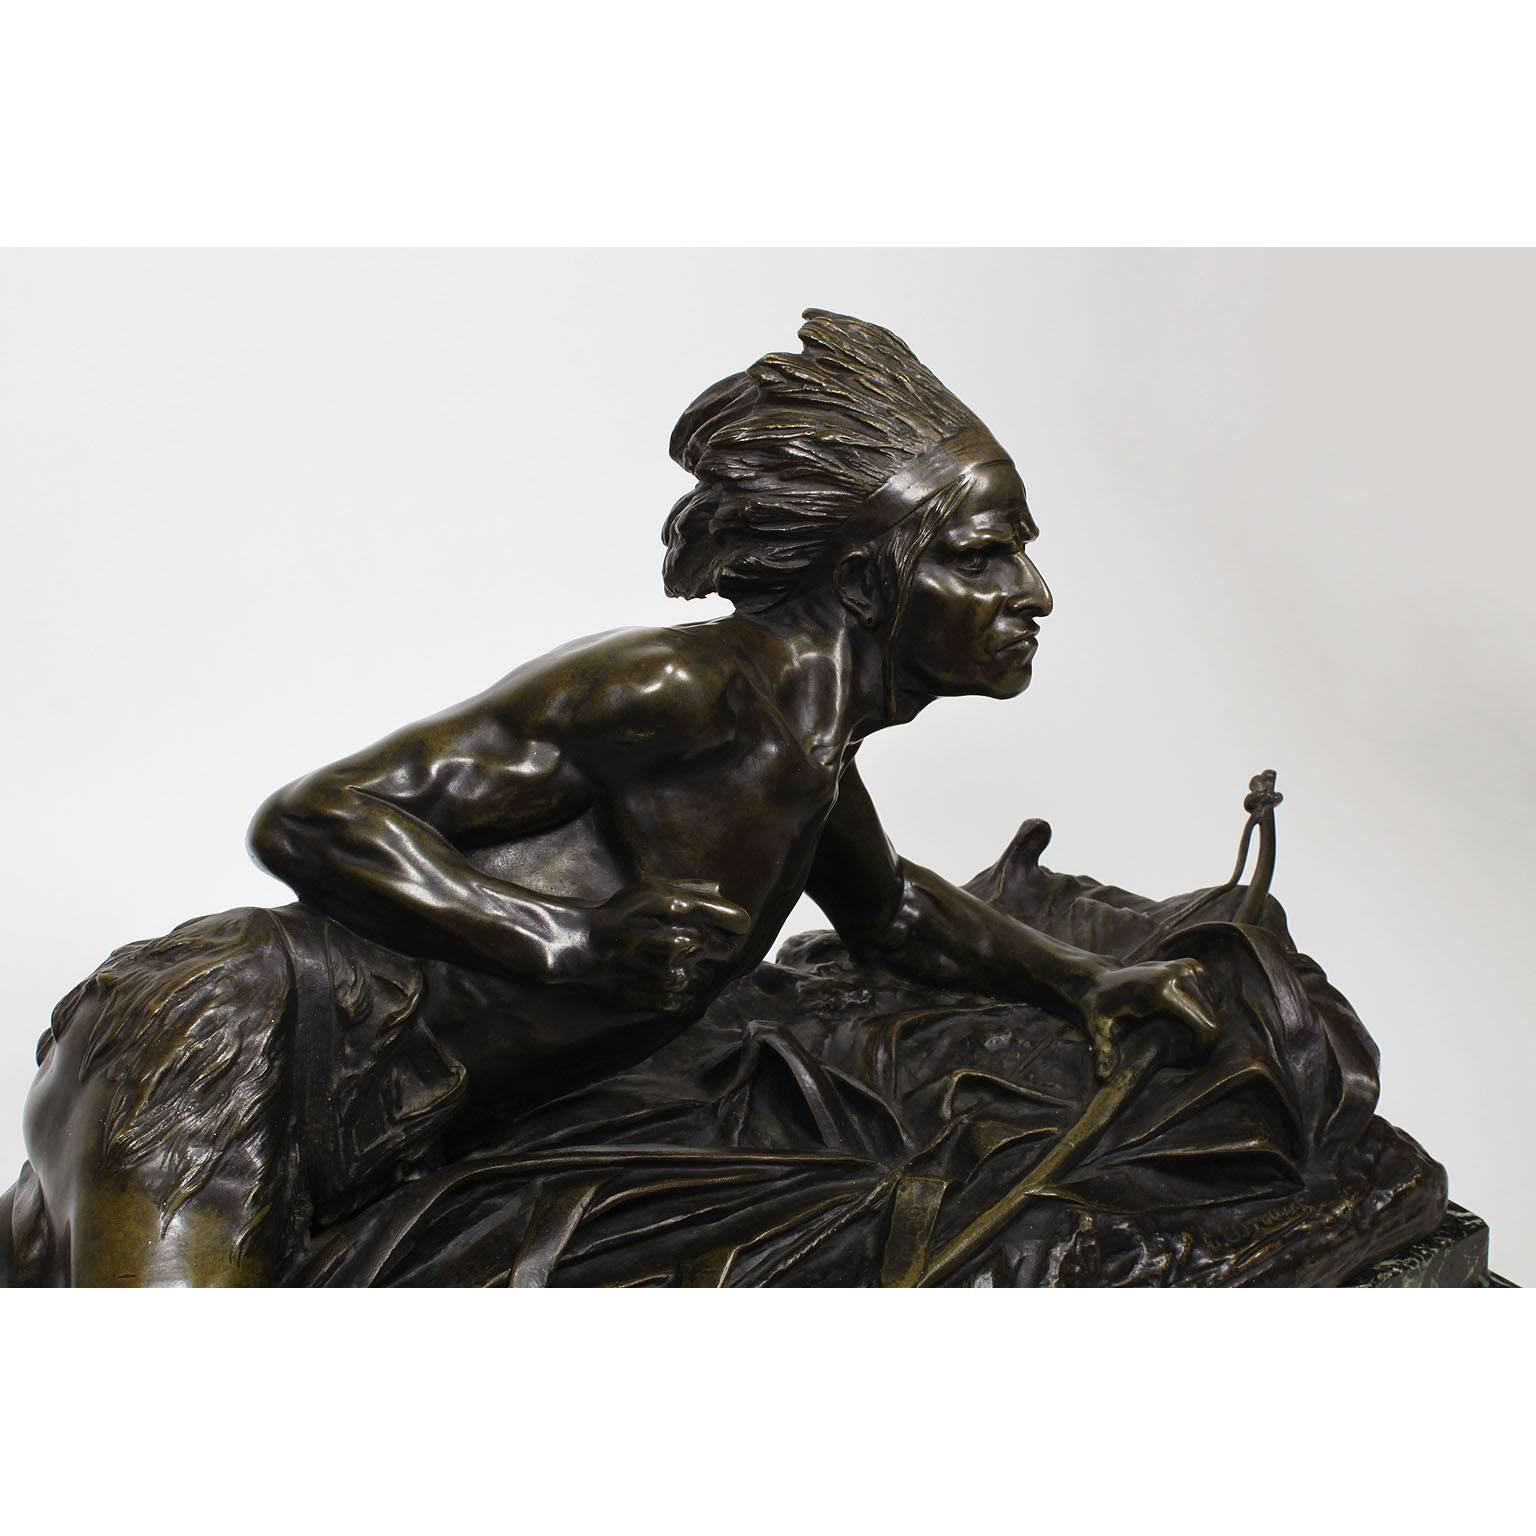 A very fine French, 19th century Patinated bronze group of a Crouching Native American Indian on the lookout, in a dark brown patina and raised on a veined green marble base, by Edouard Drouot (French, 1859-1945). Signed: E. Drouot. The back with